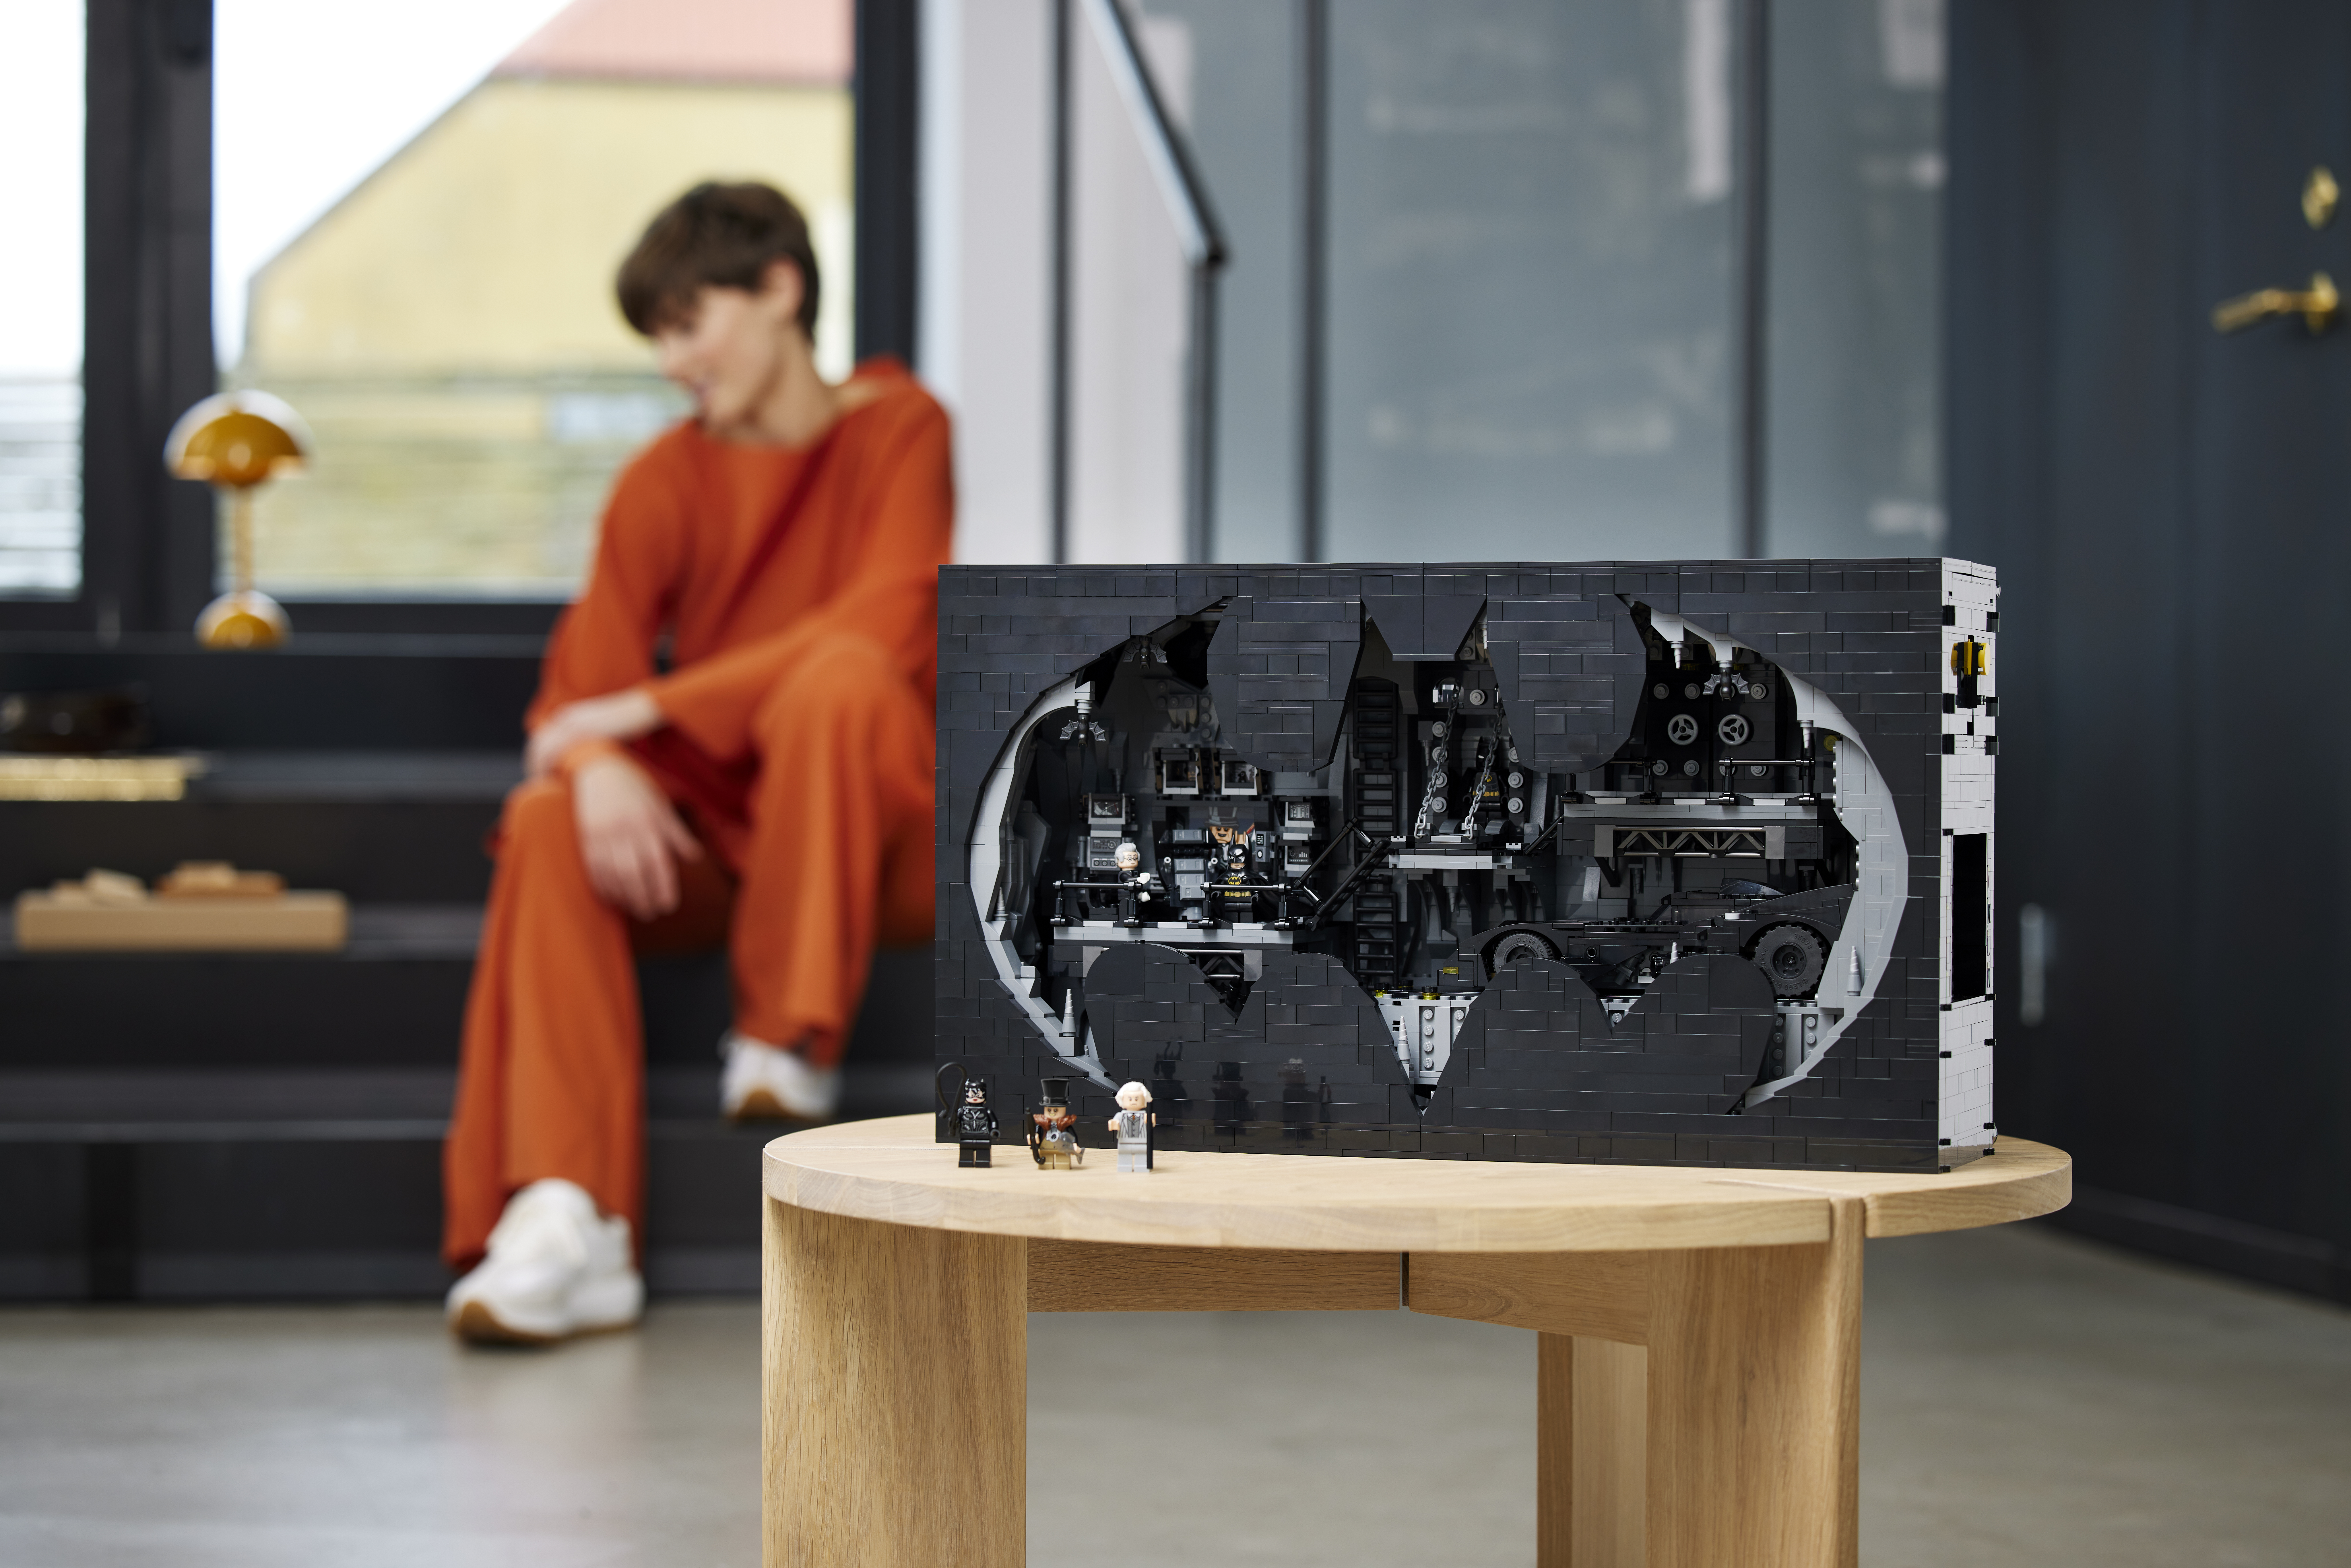 Lego’s Batcave Shadow Box set sits closed on a wooden table. It’s shaped like a wide, tall box, with a “cutout” of the batsymbol on the front, through which can be seen an intricate Lego diorama of the Batcave from Batman 1989. A person wearing orange sits in the background. 